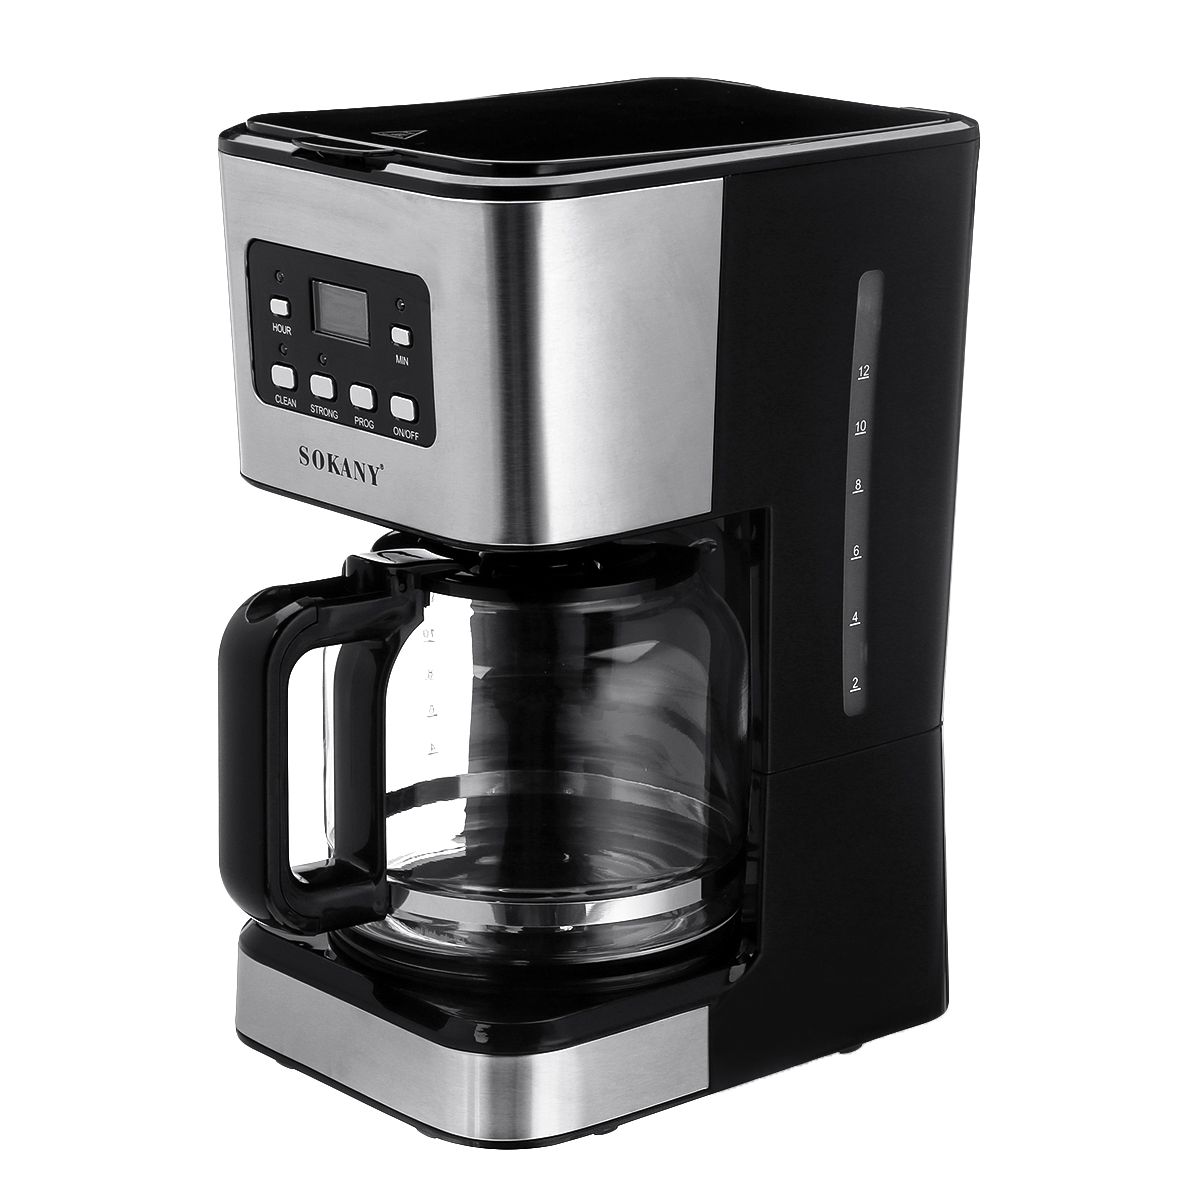 220V-Coffee-Maker-12-Cups-15L-Semi-Automatic-Espresso-Making-Machine-Stainless-Steel-1560948